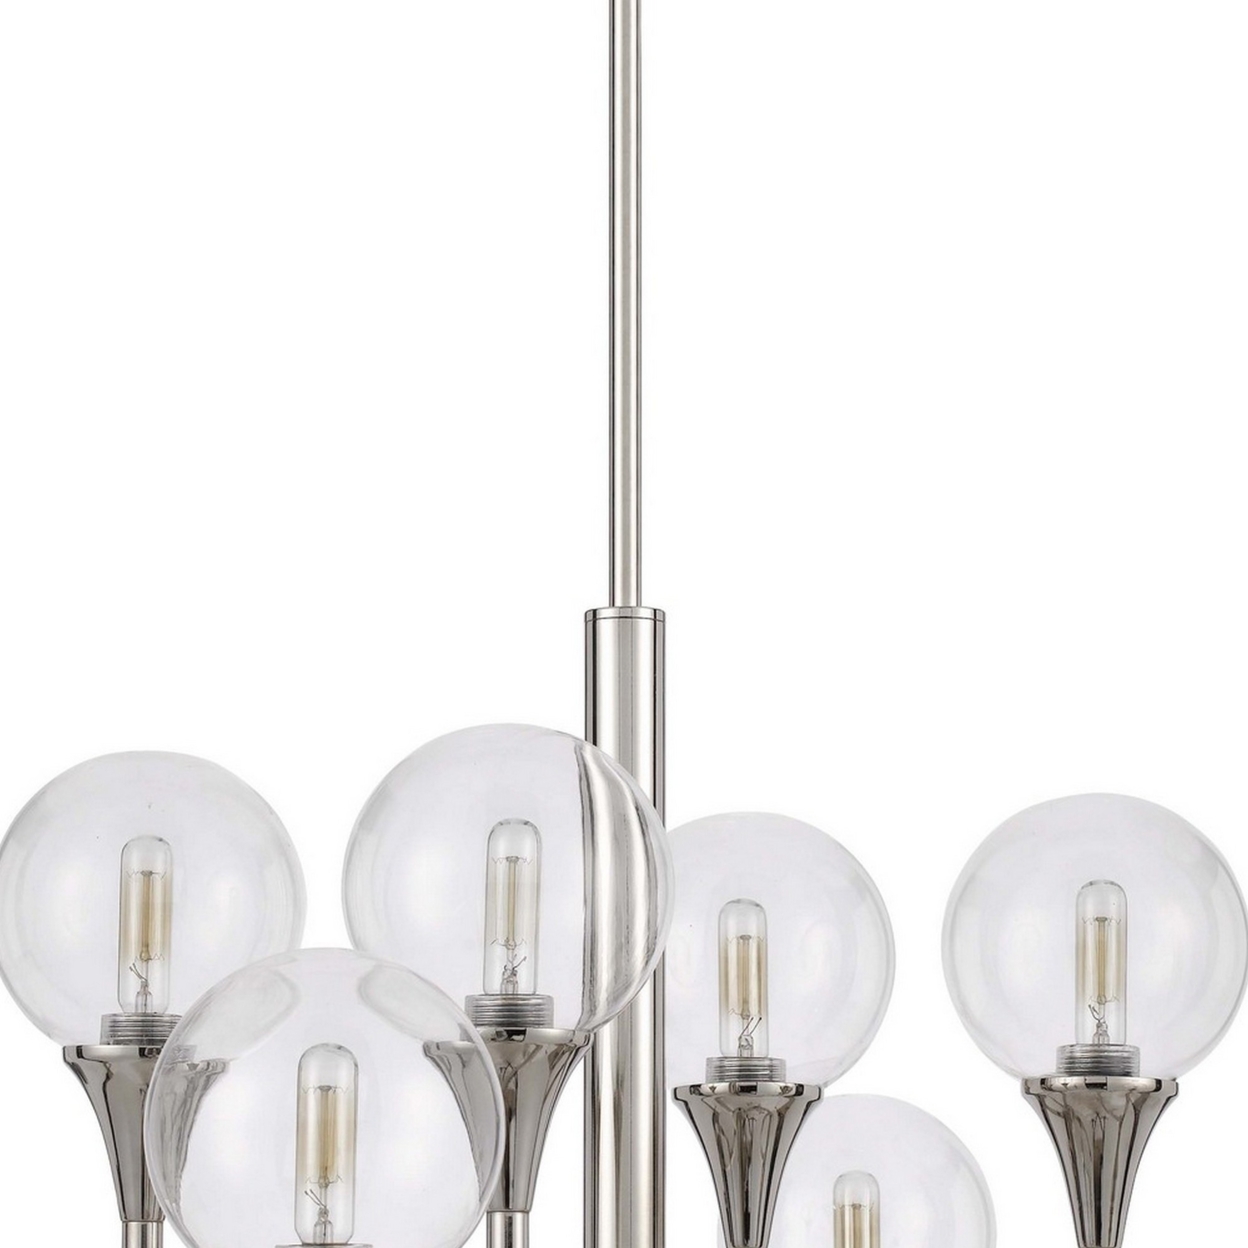 Chandelier With 8 Globe Glass Shades And Cone Design Holders, Chrome- Saltoro Sherpi